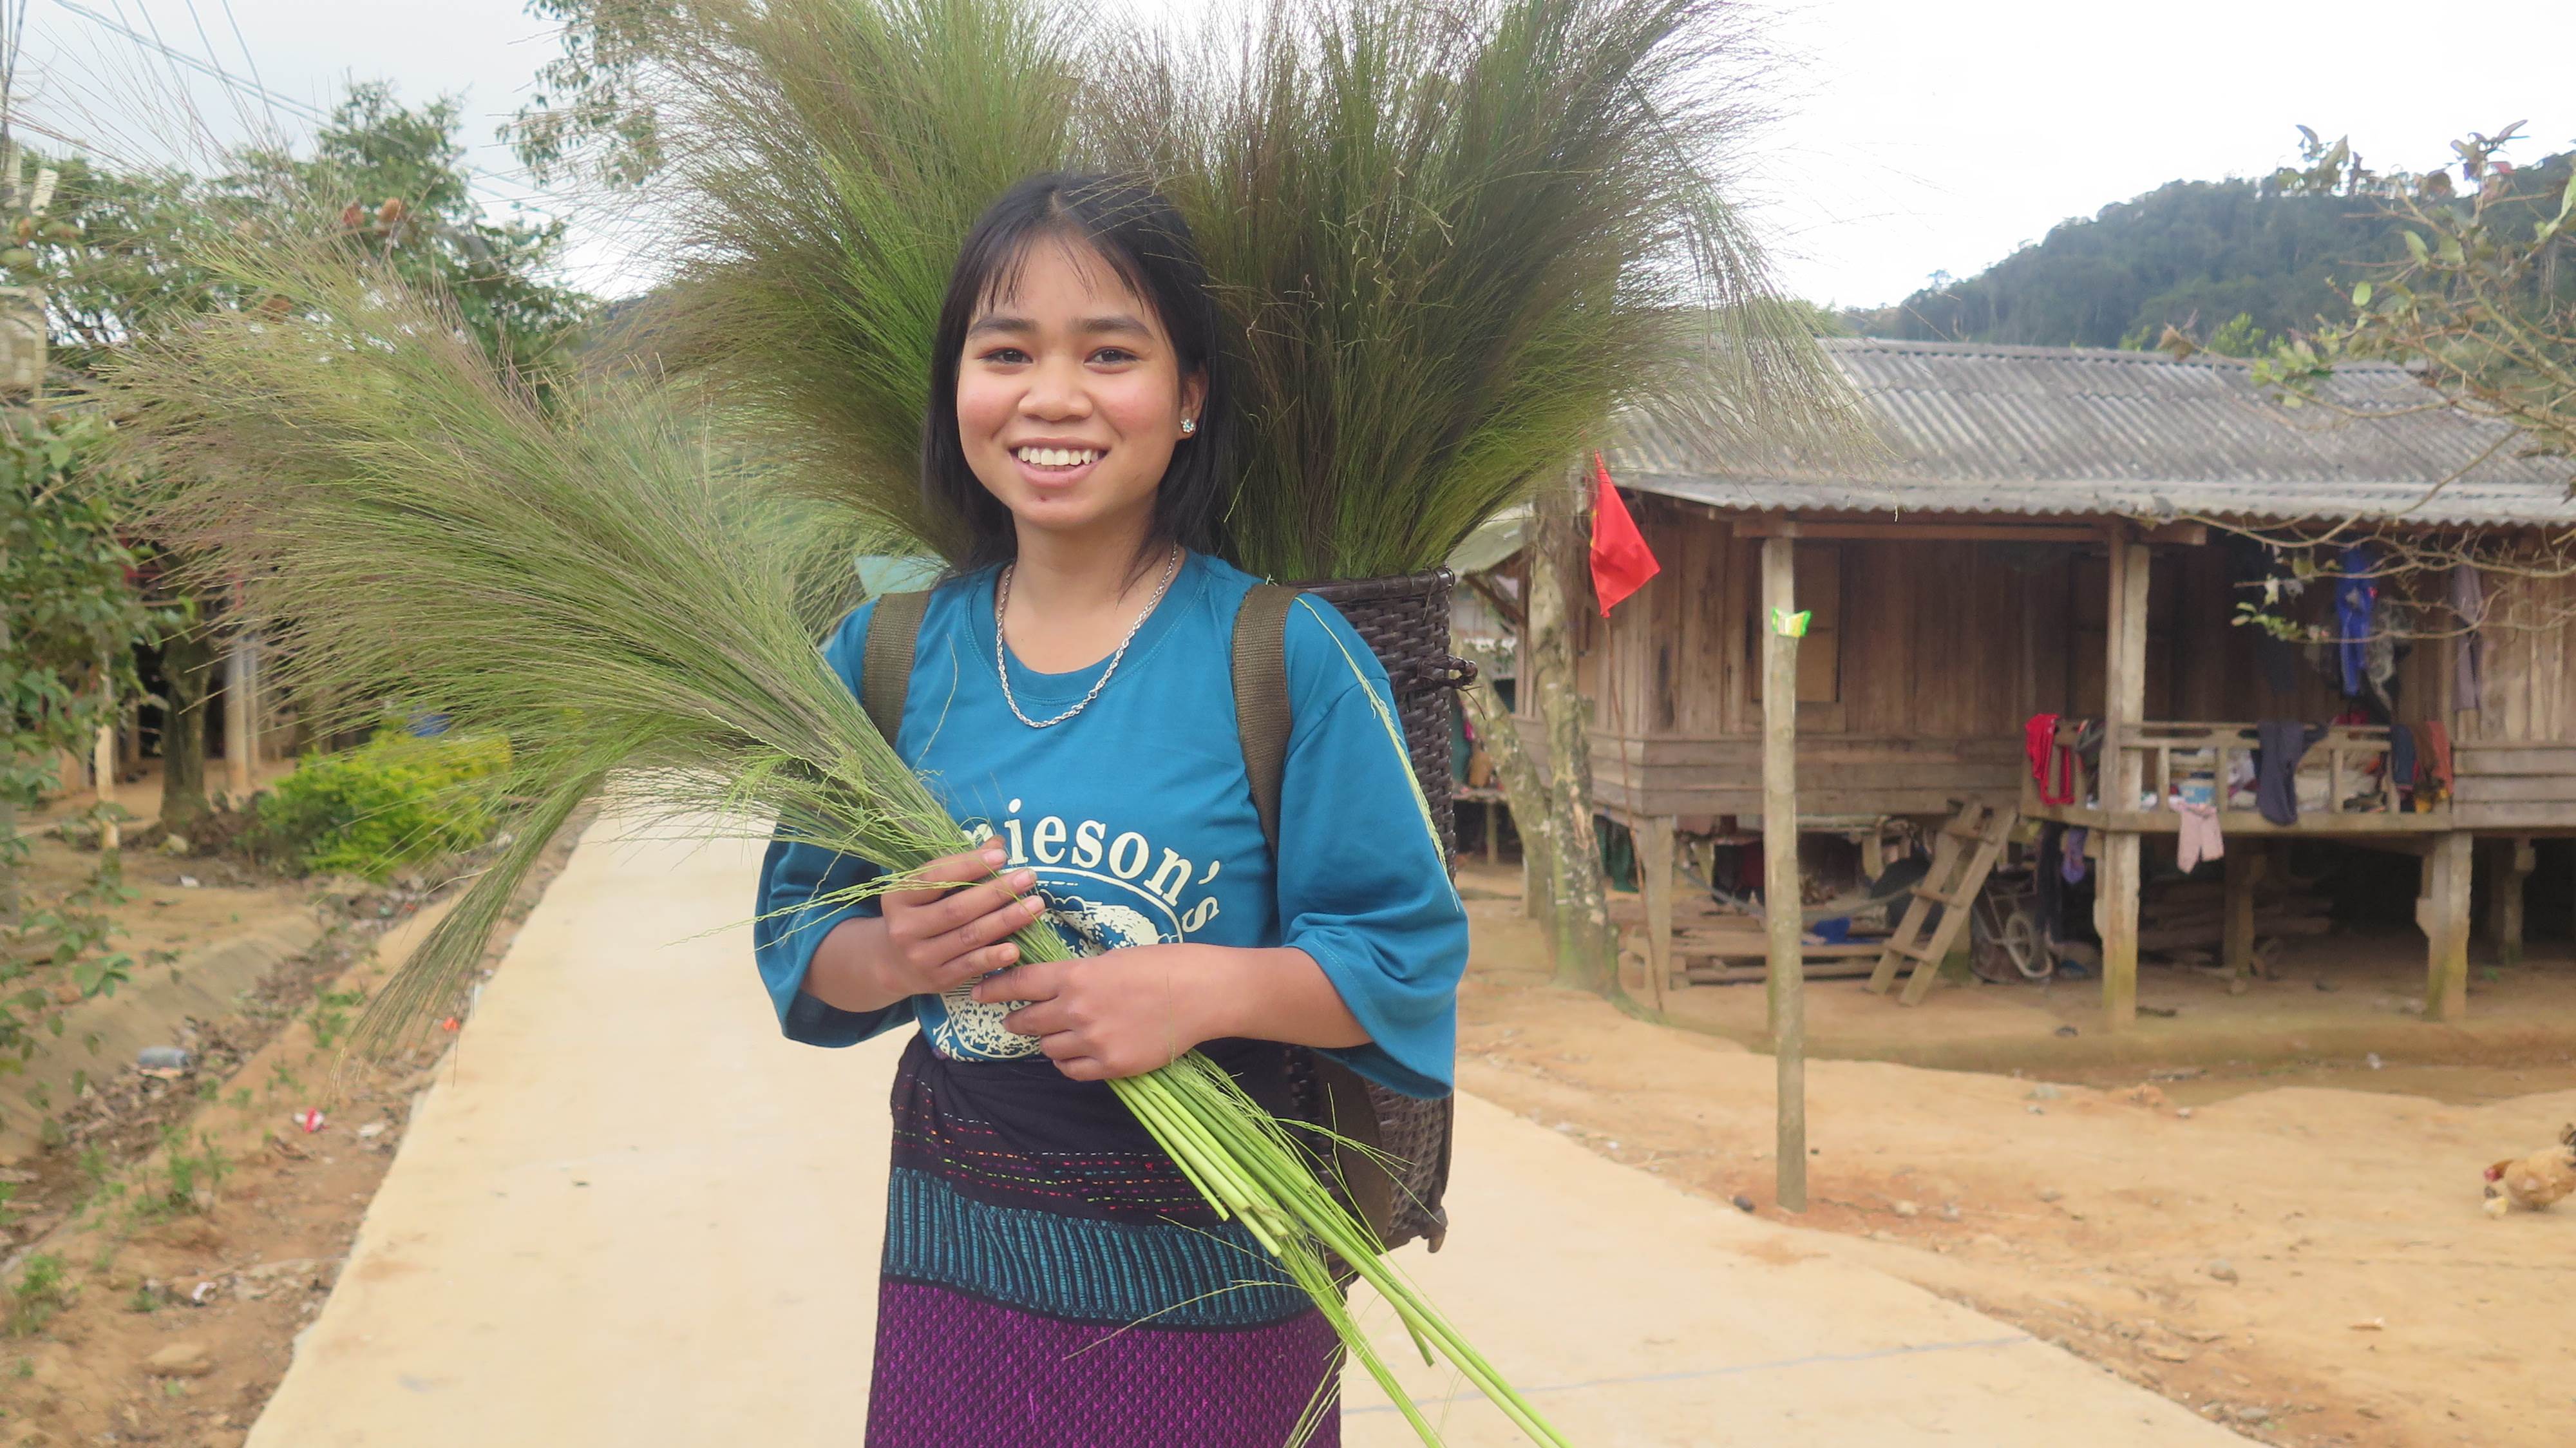 Girl from Vietnam holding some branches while smiling and looking at the camera